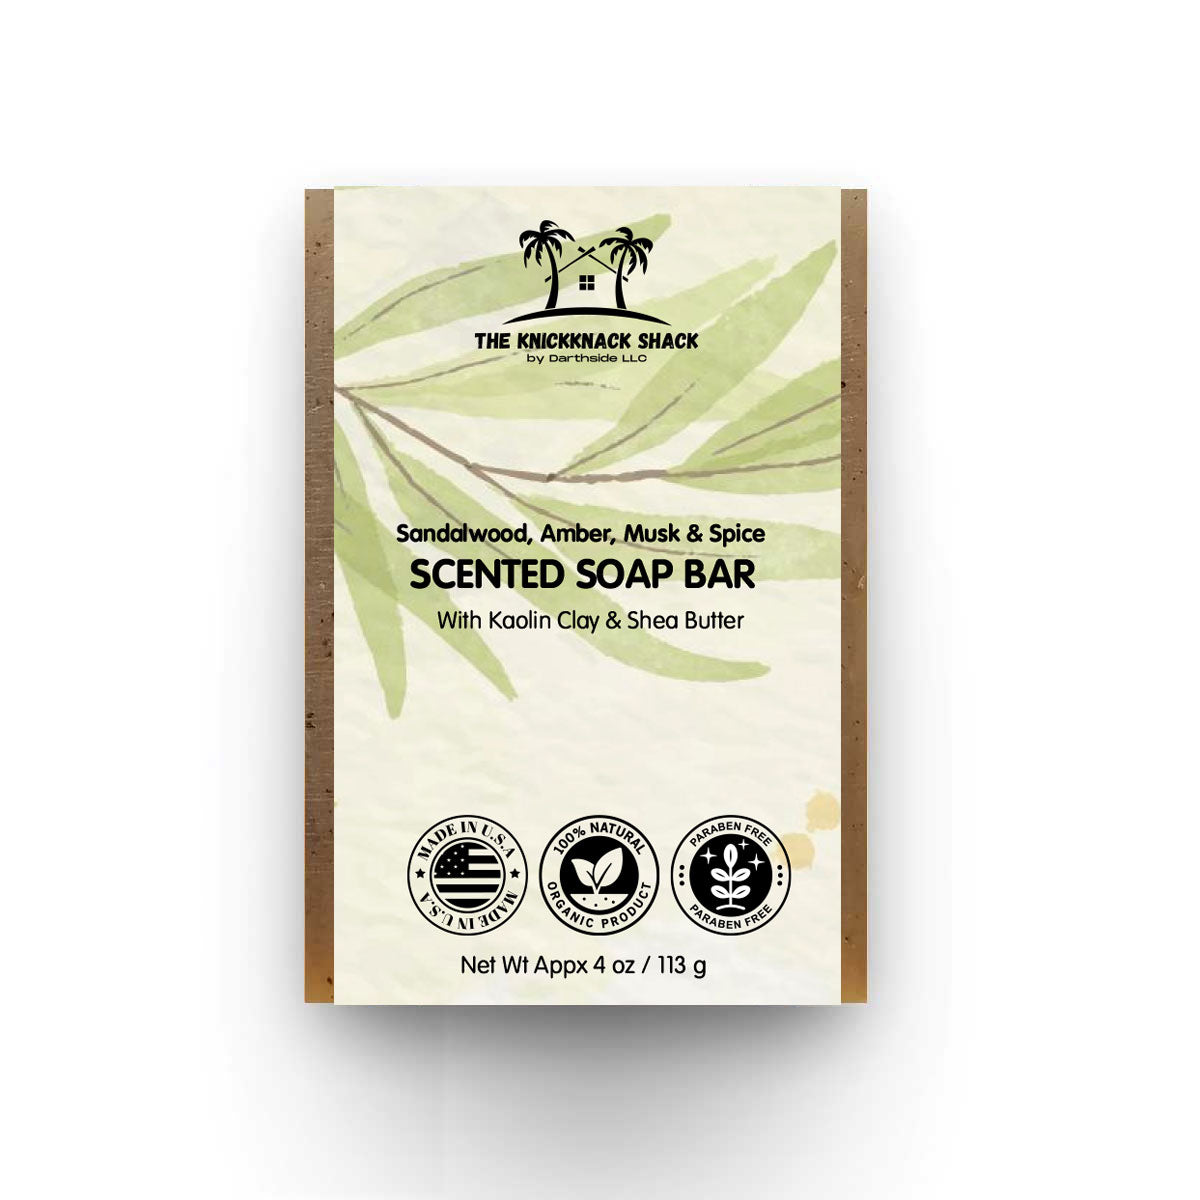 Sandalwood, Amber, Musk & Spice Scented Soap Bar With Kaolin Clay & Shea Butter